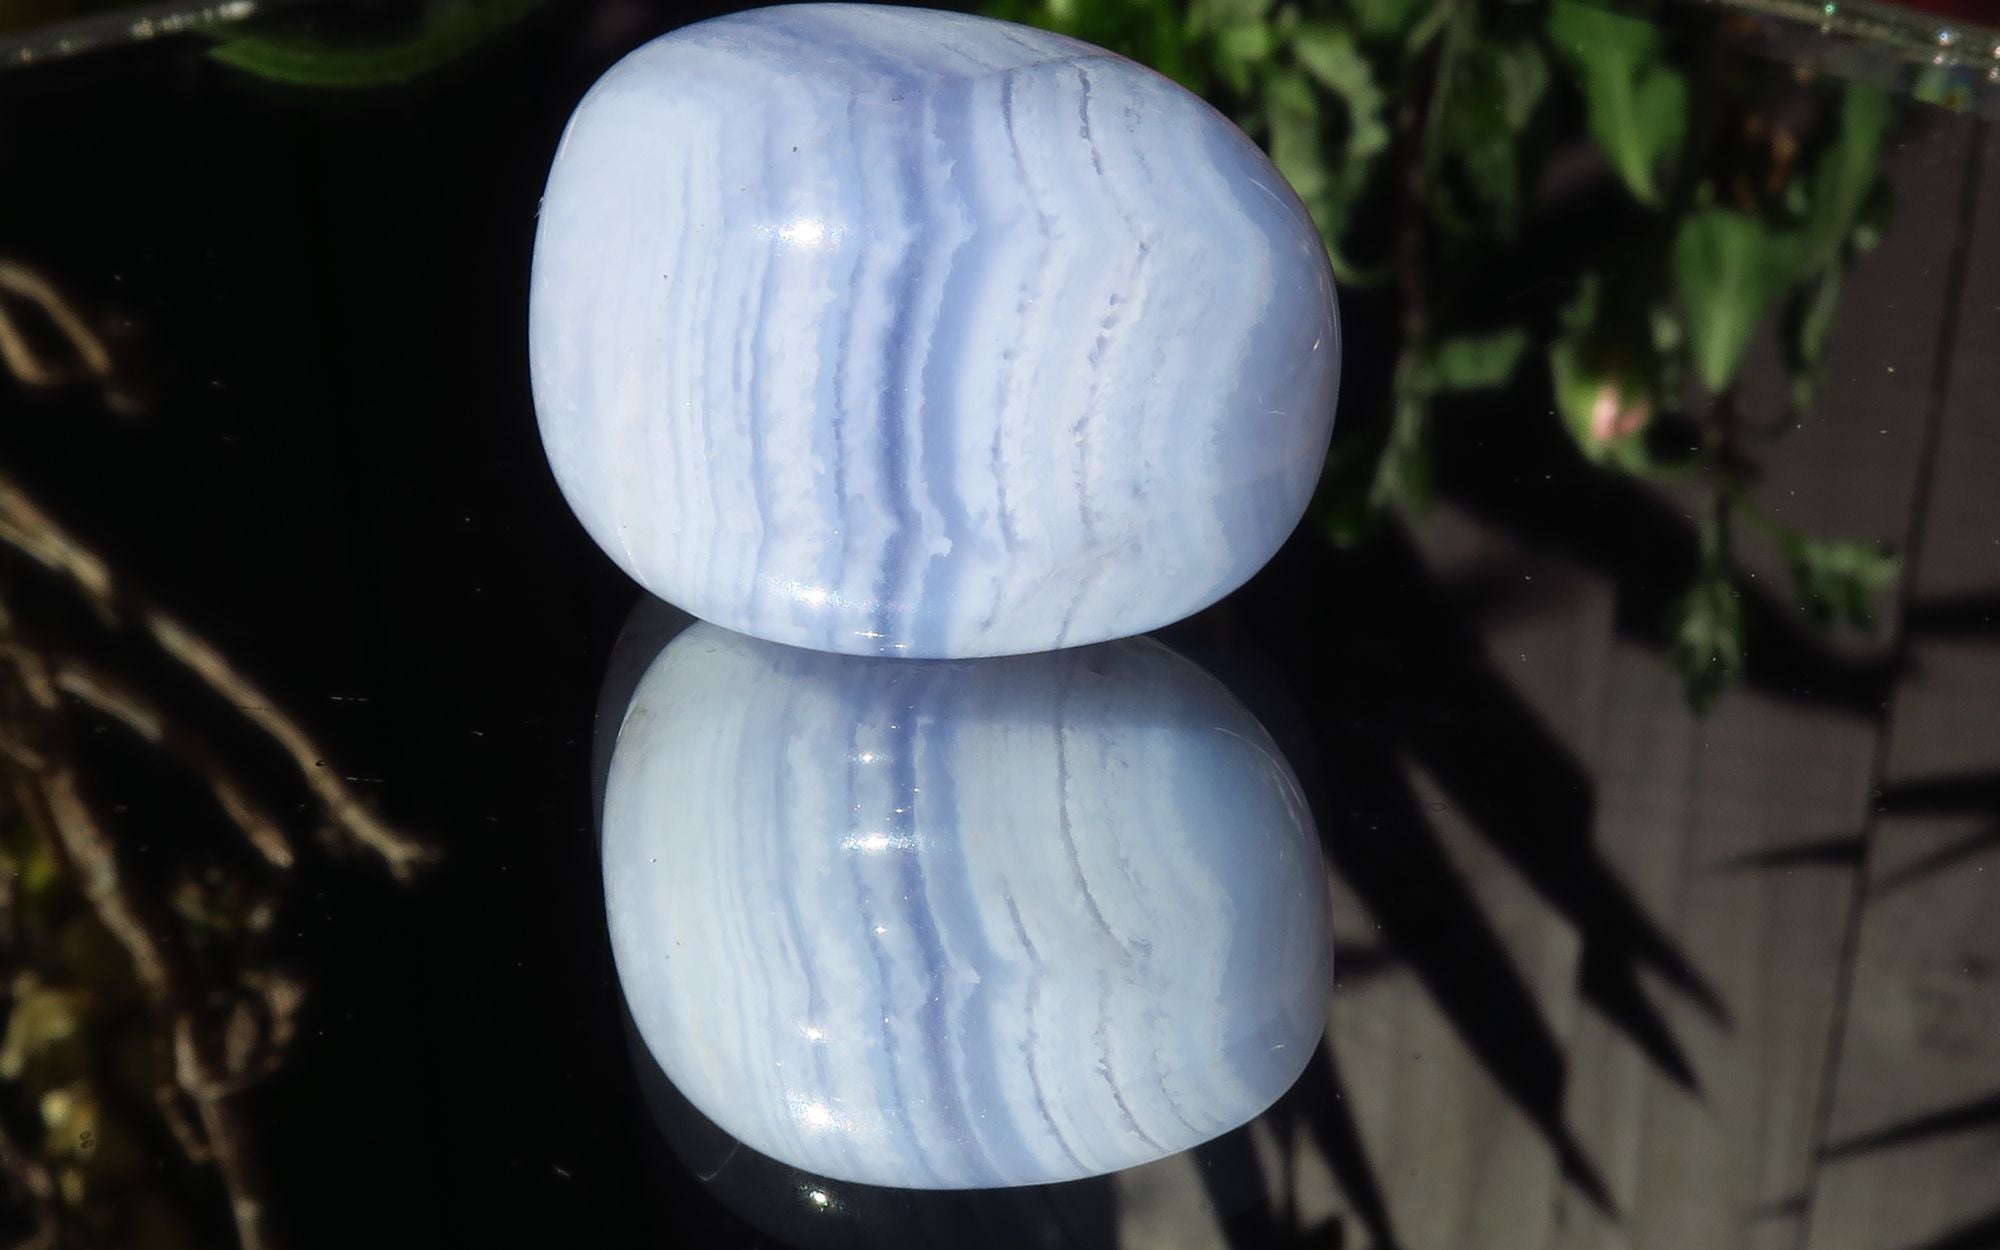 Blue agate meaning and properties - Crystals by Lina